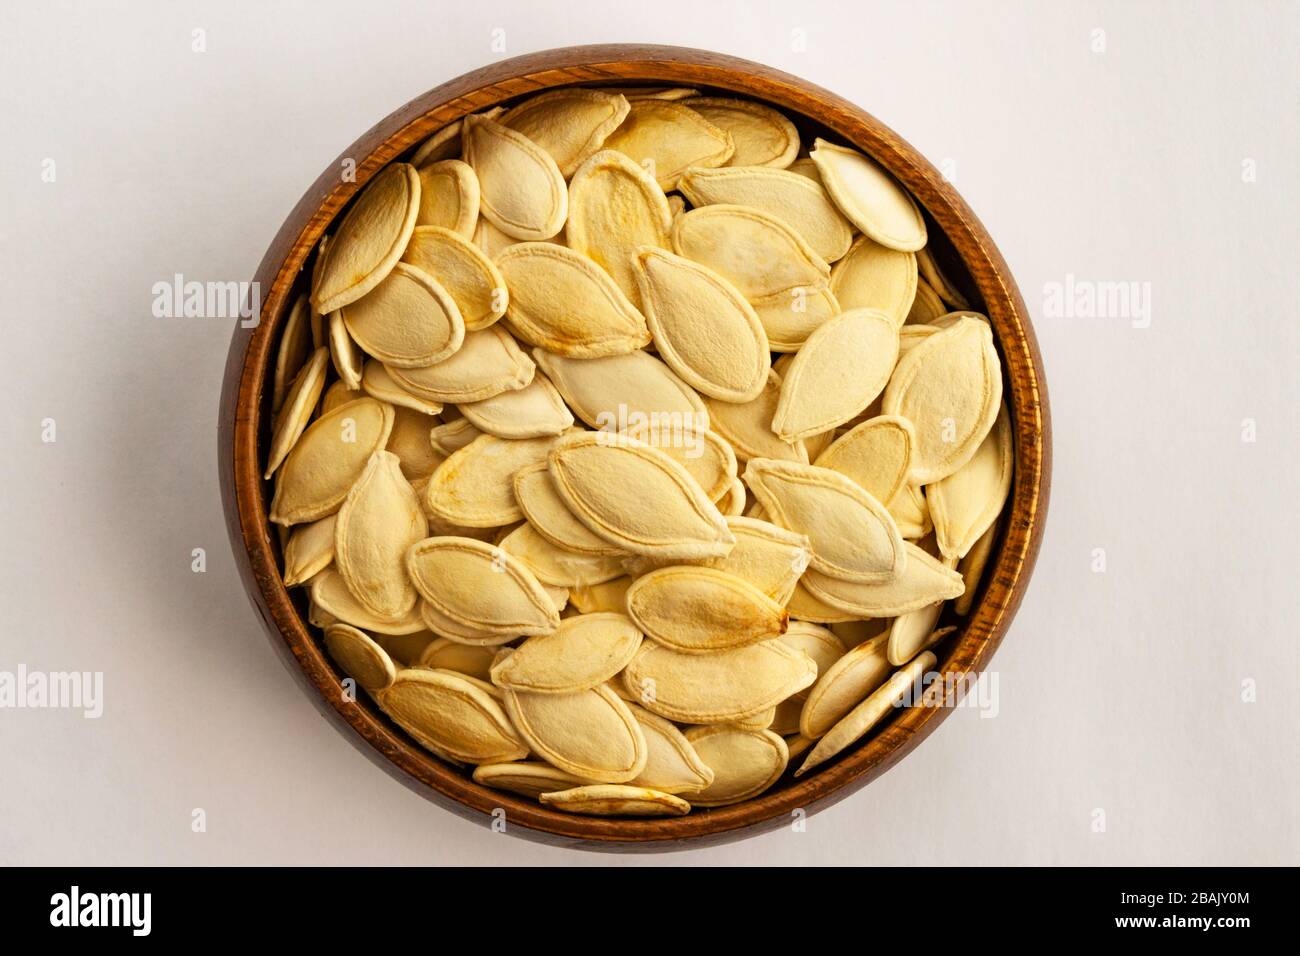 Unpeeled white color pumpkin seeds in bamboo bowl on white background. Stock Photo